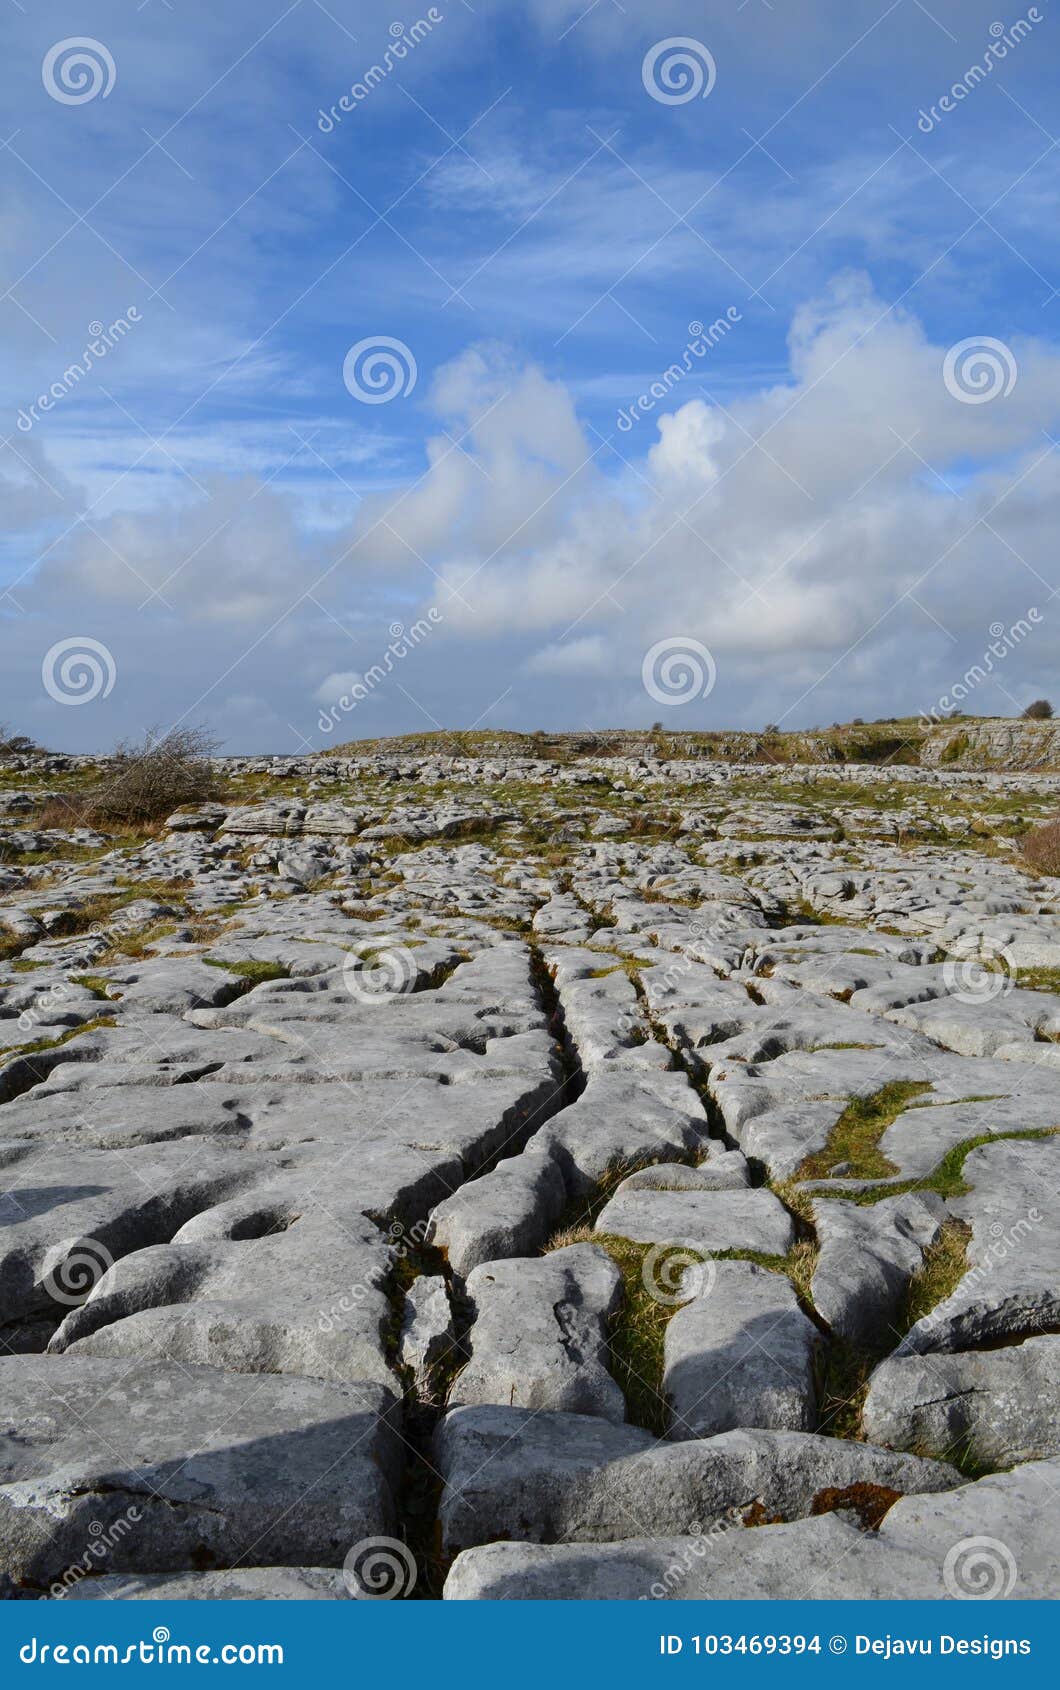 Stunning Landscape of Burren Park with White and Gray Rocks Stock Photo ...